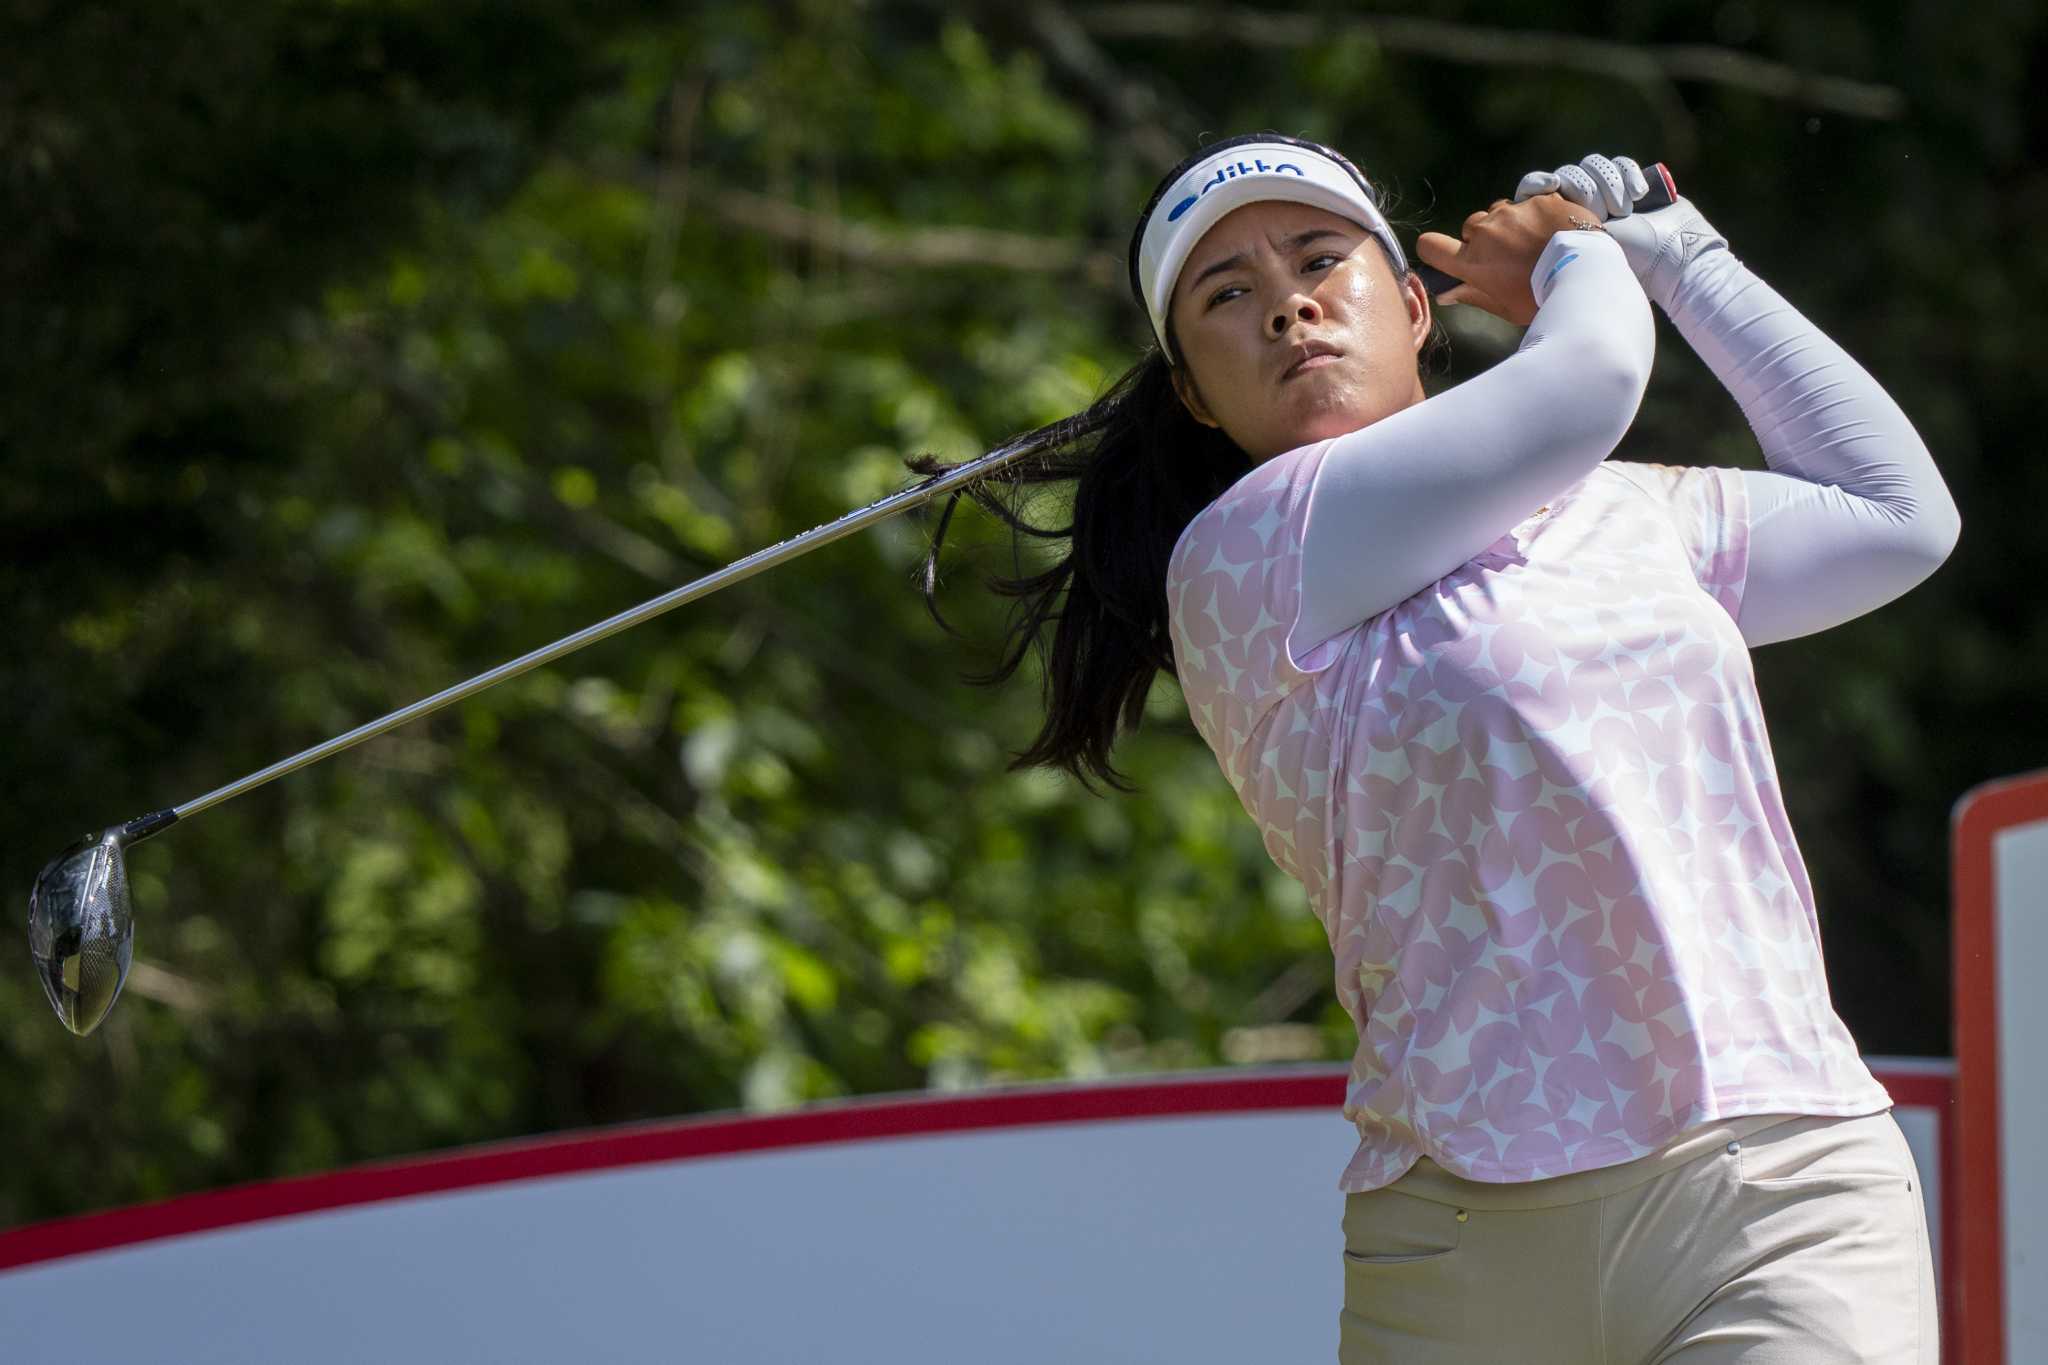 Aprichaya Yubol shoots a career-best 61 to take the first-round lead at ShopRite LPGA Classic